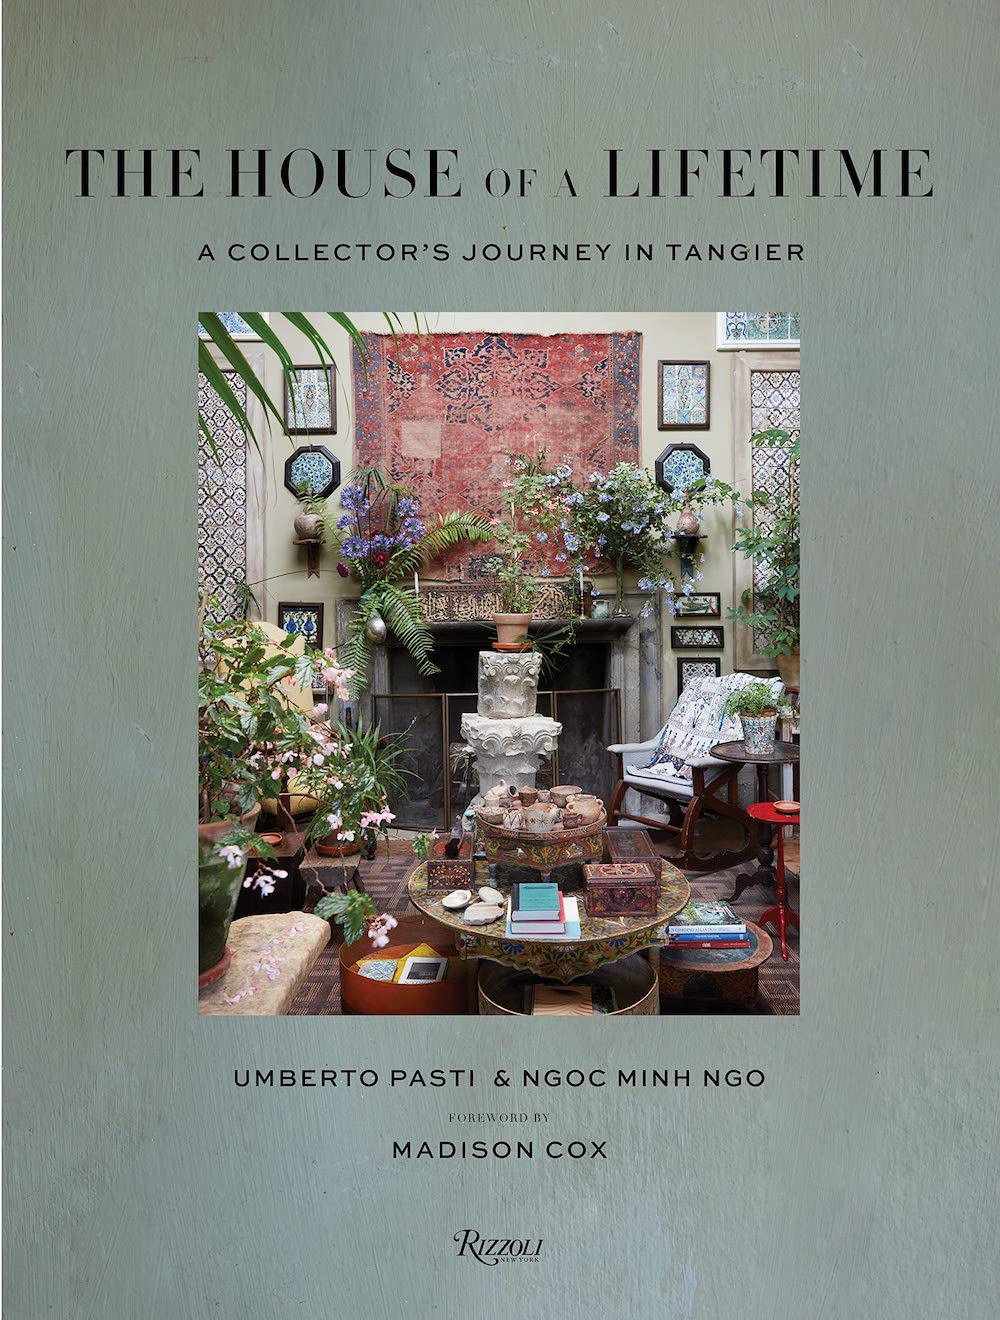 The House of a Lifetime book